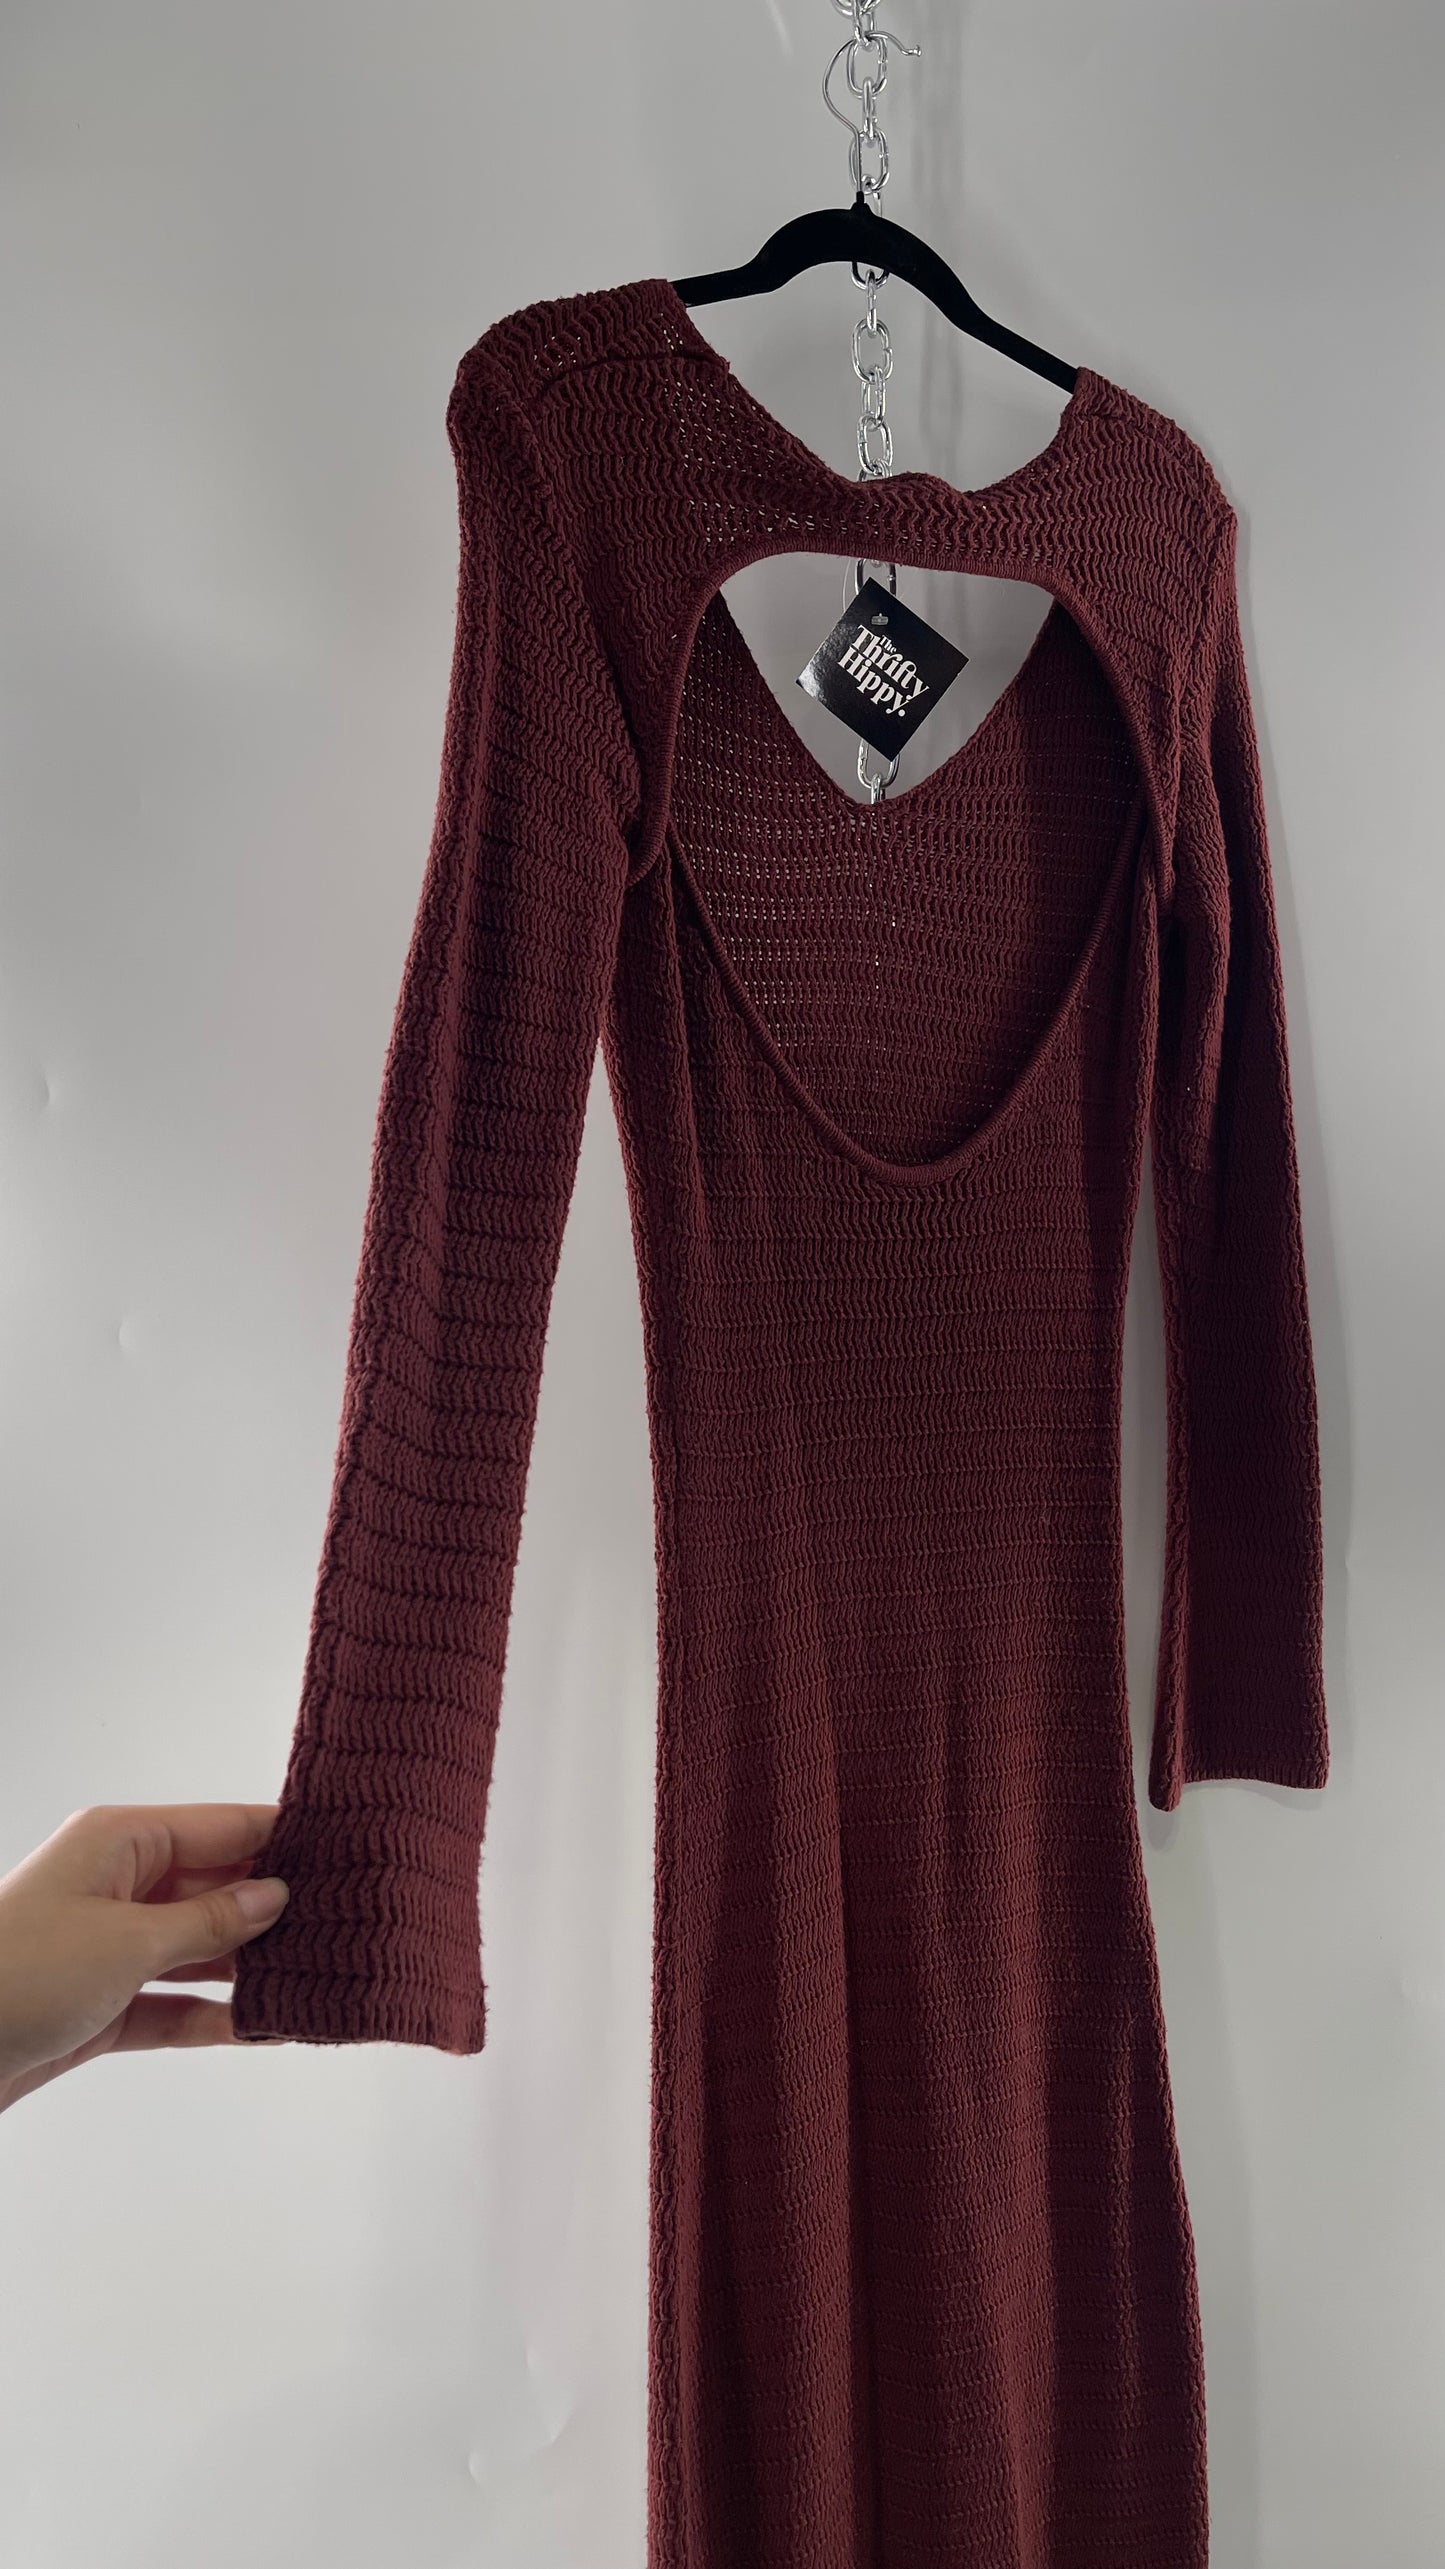 Free People Burgundy Knit Maxi Dress with Open Back and Bell Sleeves (Small)